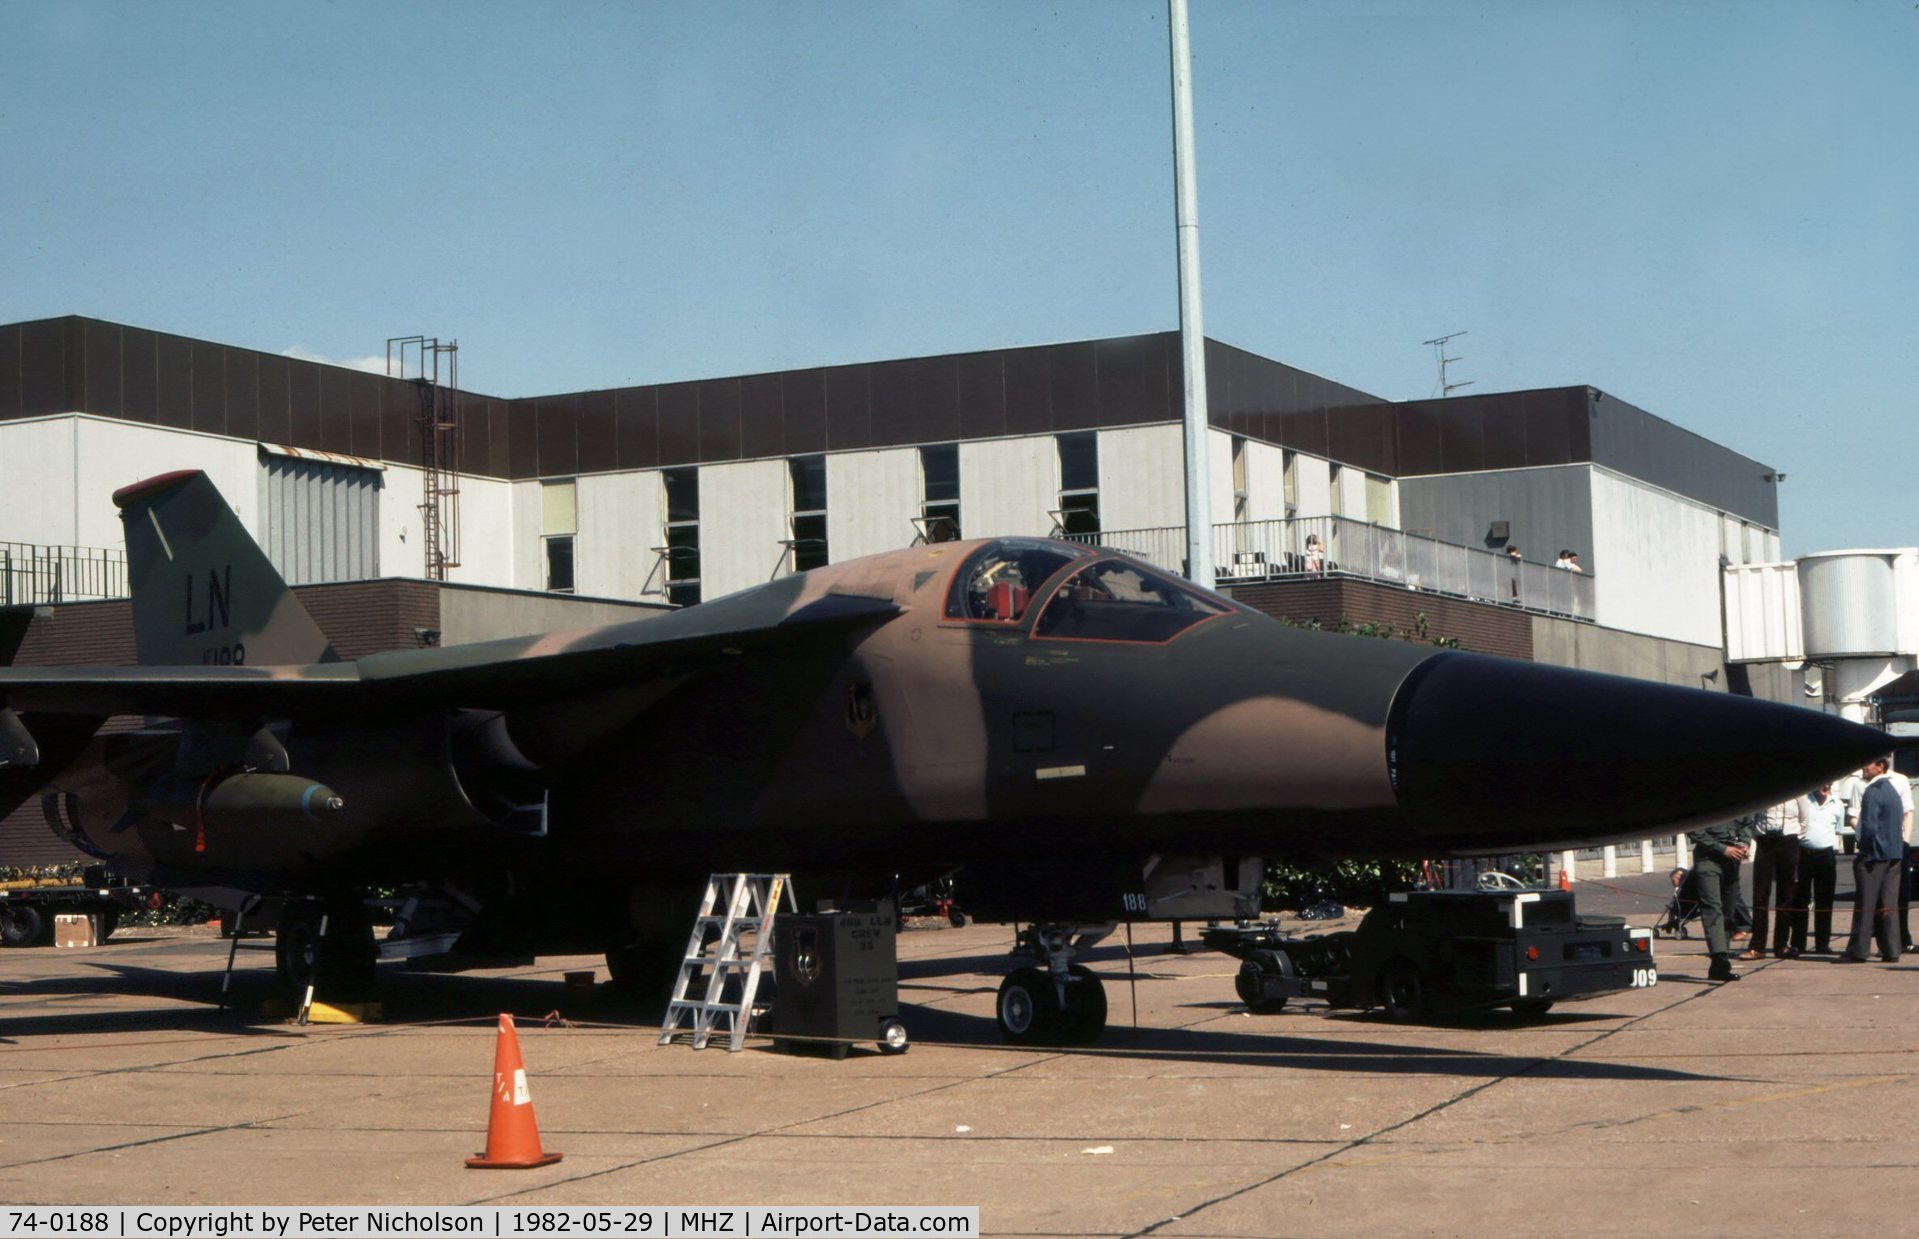 74-0188, 1974 General Dynamics F-111F Aardvark C/N E2-106, Another view of the 492nd Tactical Fighter Squadron's F-111F at the 1982 RAF Mildenhall Air Fete.